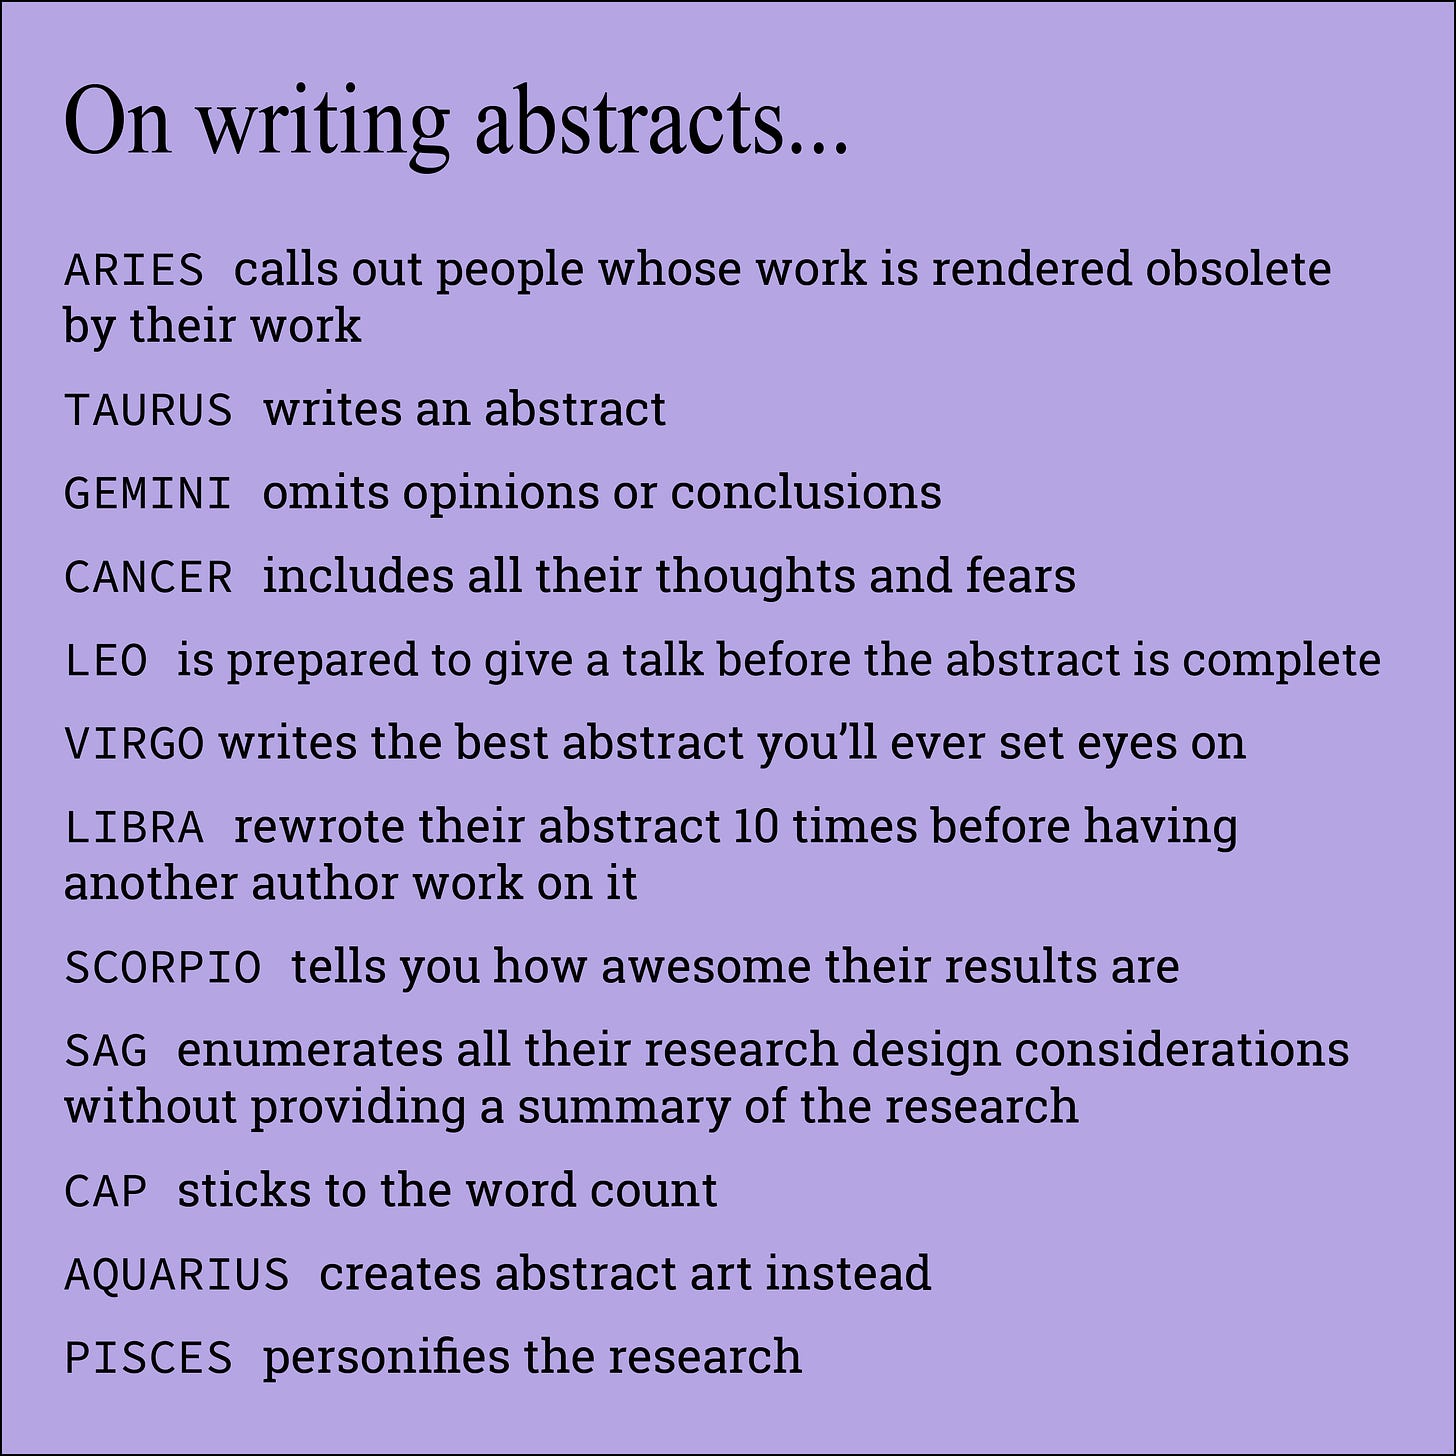 a chart on writing abstracts according to astrological signs